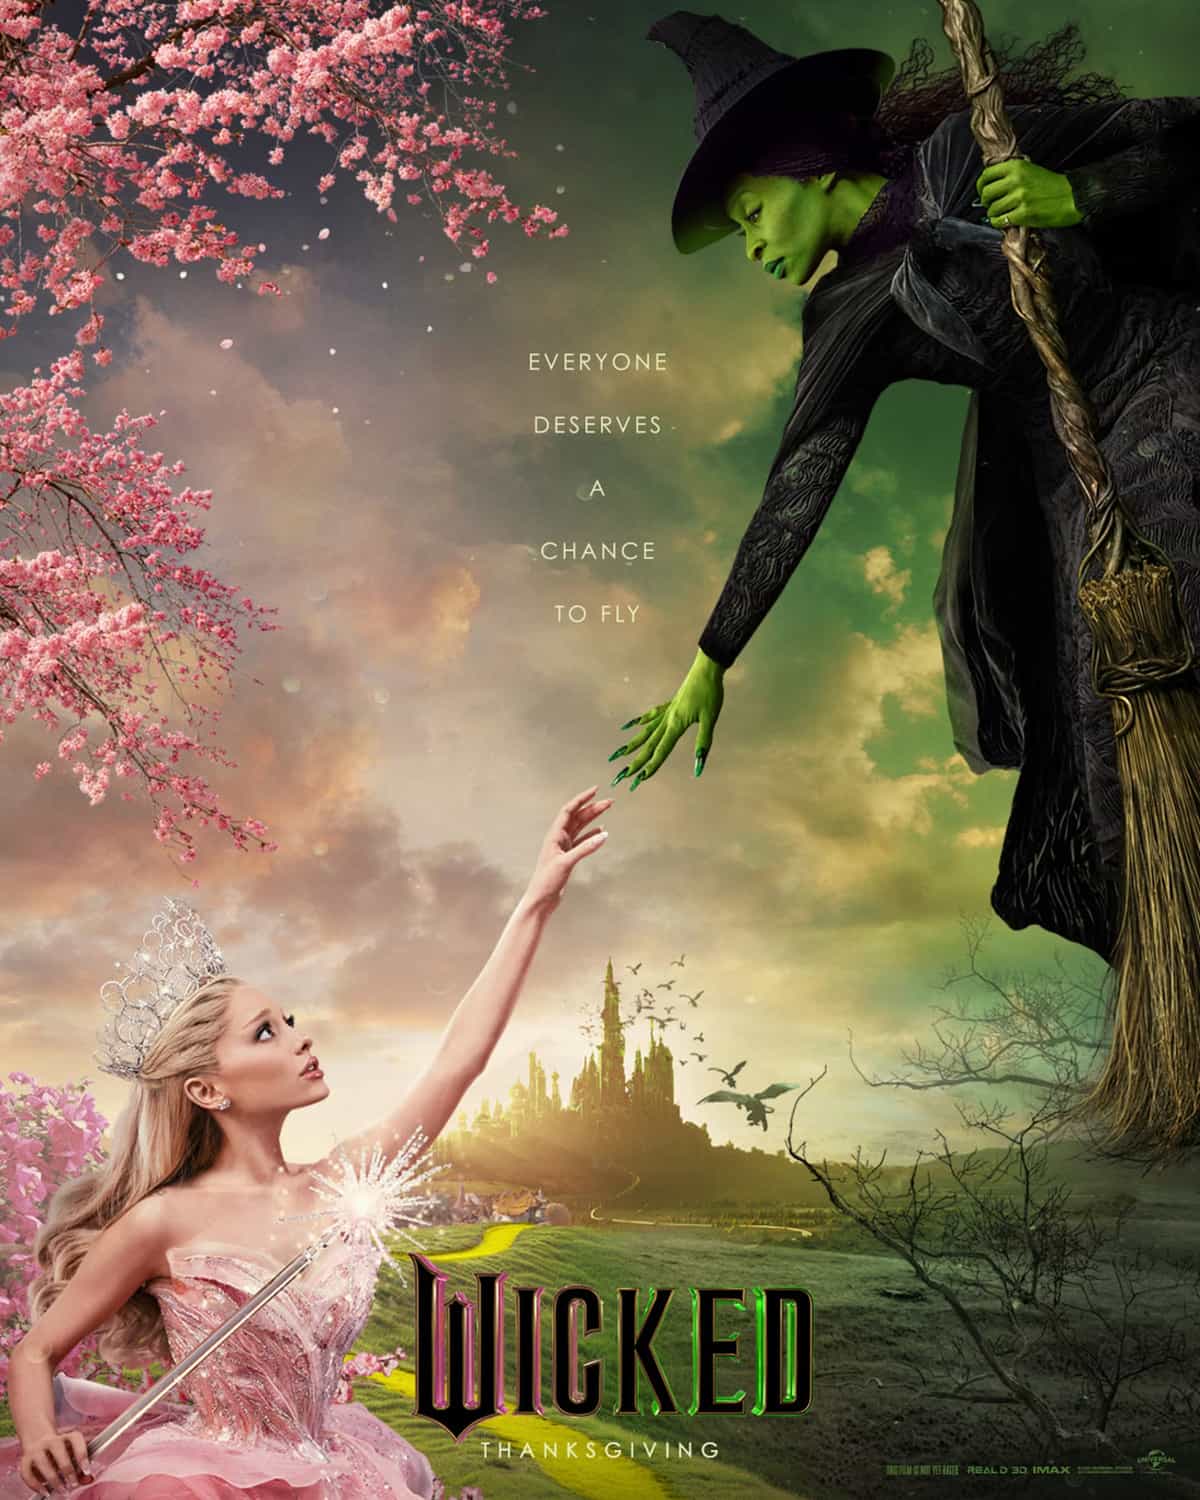 Check out the new trailer and poster for upcoming movie Wicked which stars Ariana Grande and Cynthia Erivo - movie UK release date 24th November 2024 #wicked